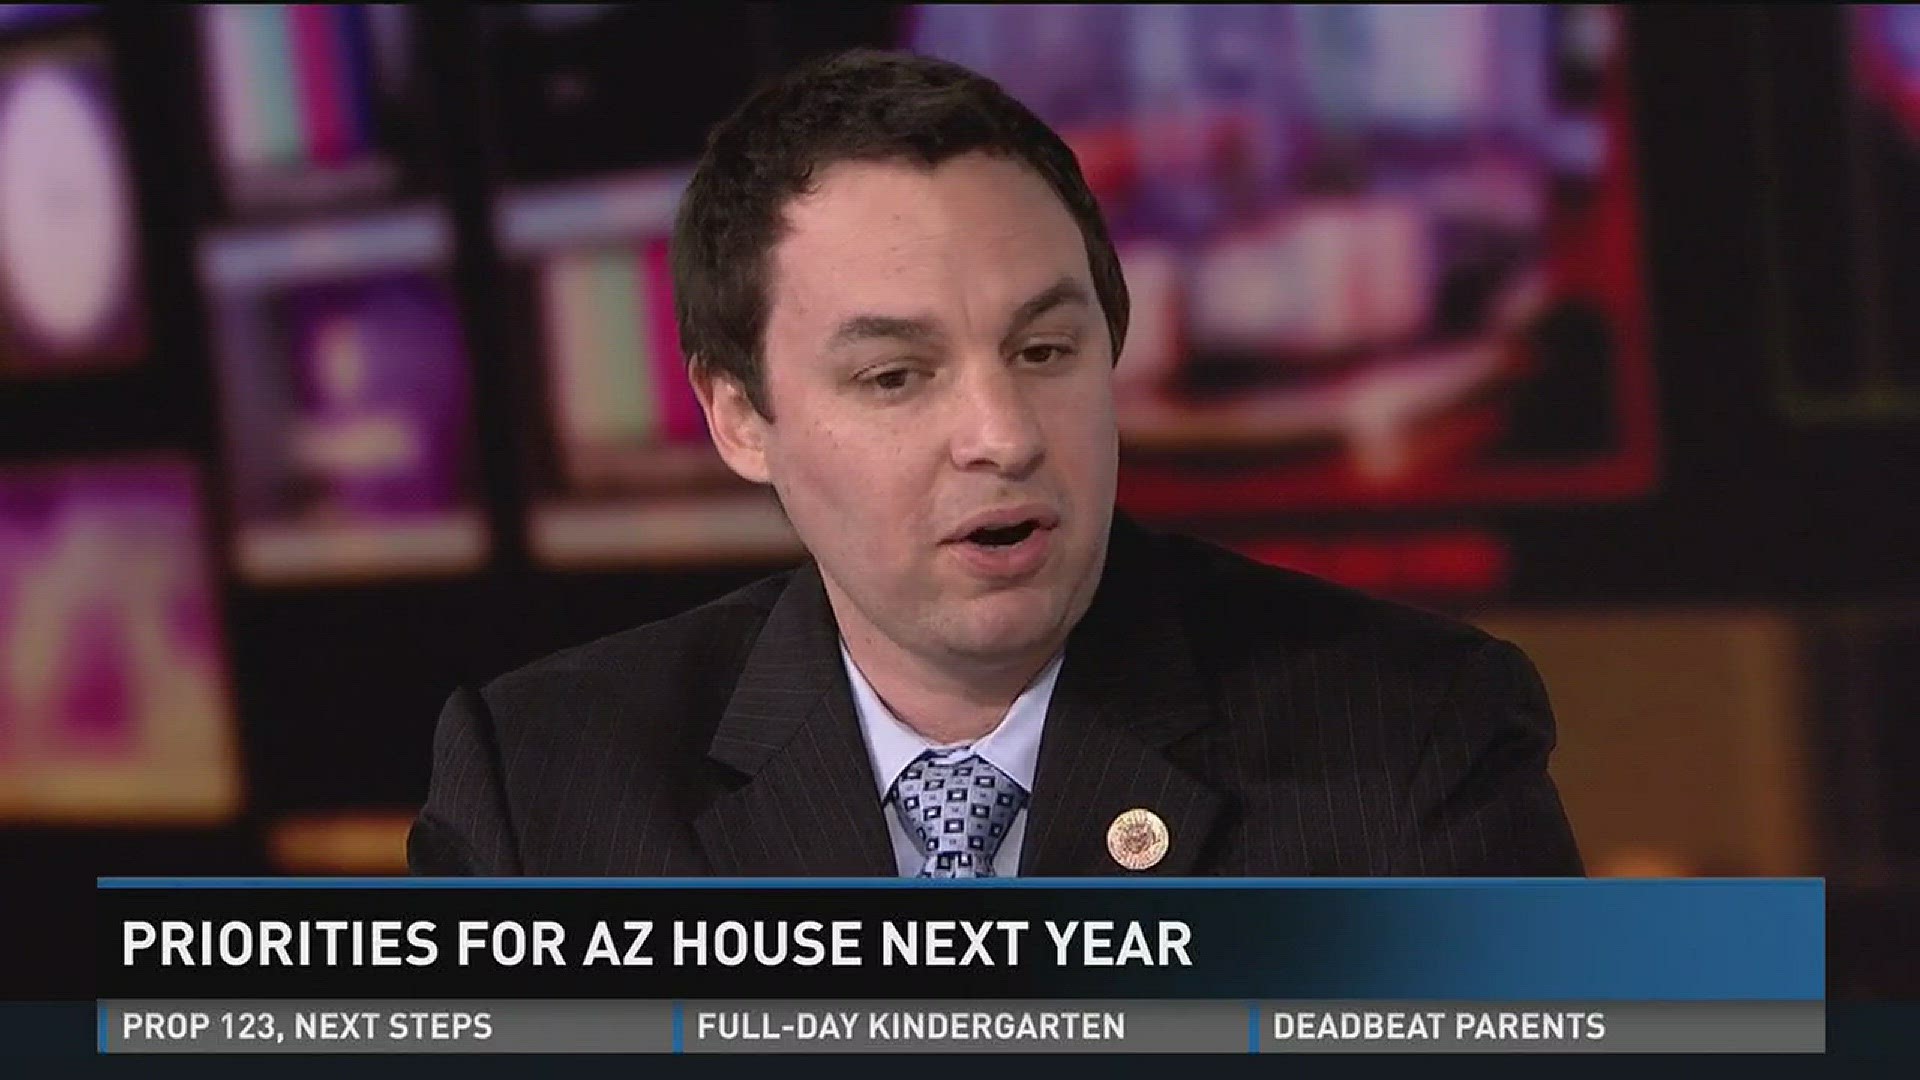 Incoming Arizona House Speaker J.D. Mesnard says he's looking forward to the Republican Congress repealing Obamacare, and will make education funding, including more money for school construction and maintenance, a priority in the new session.